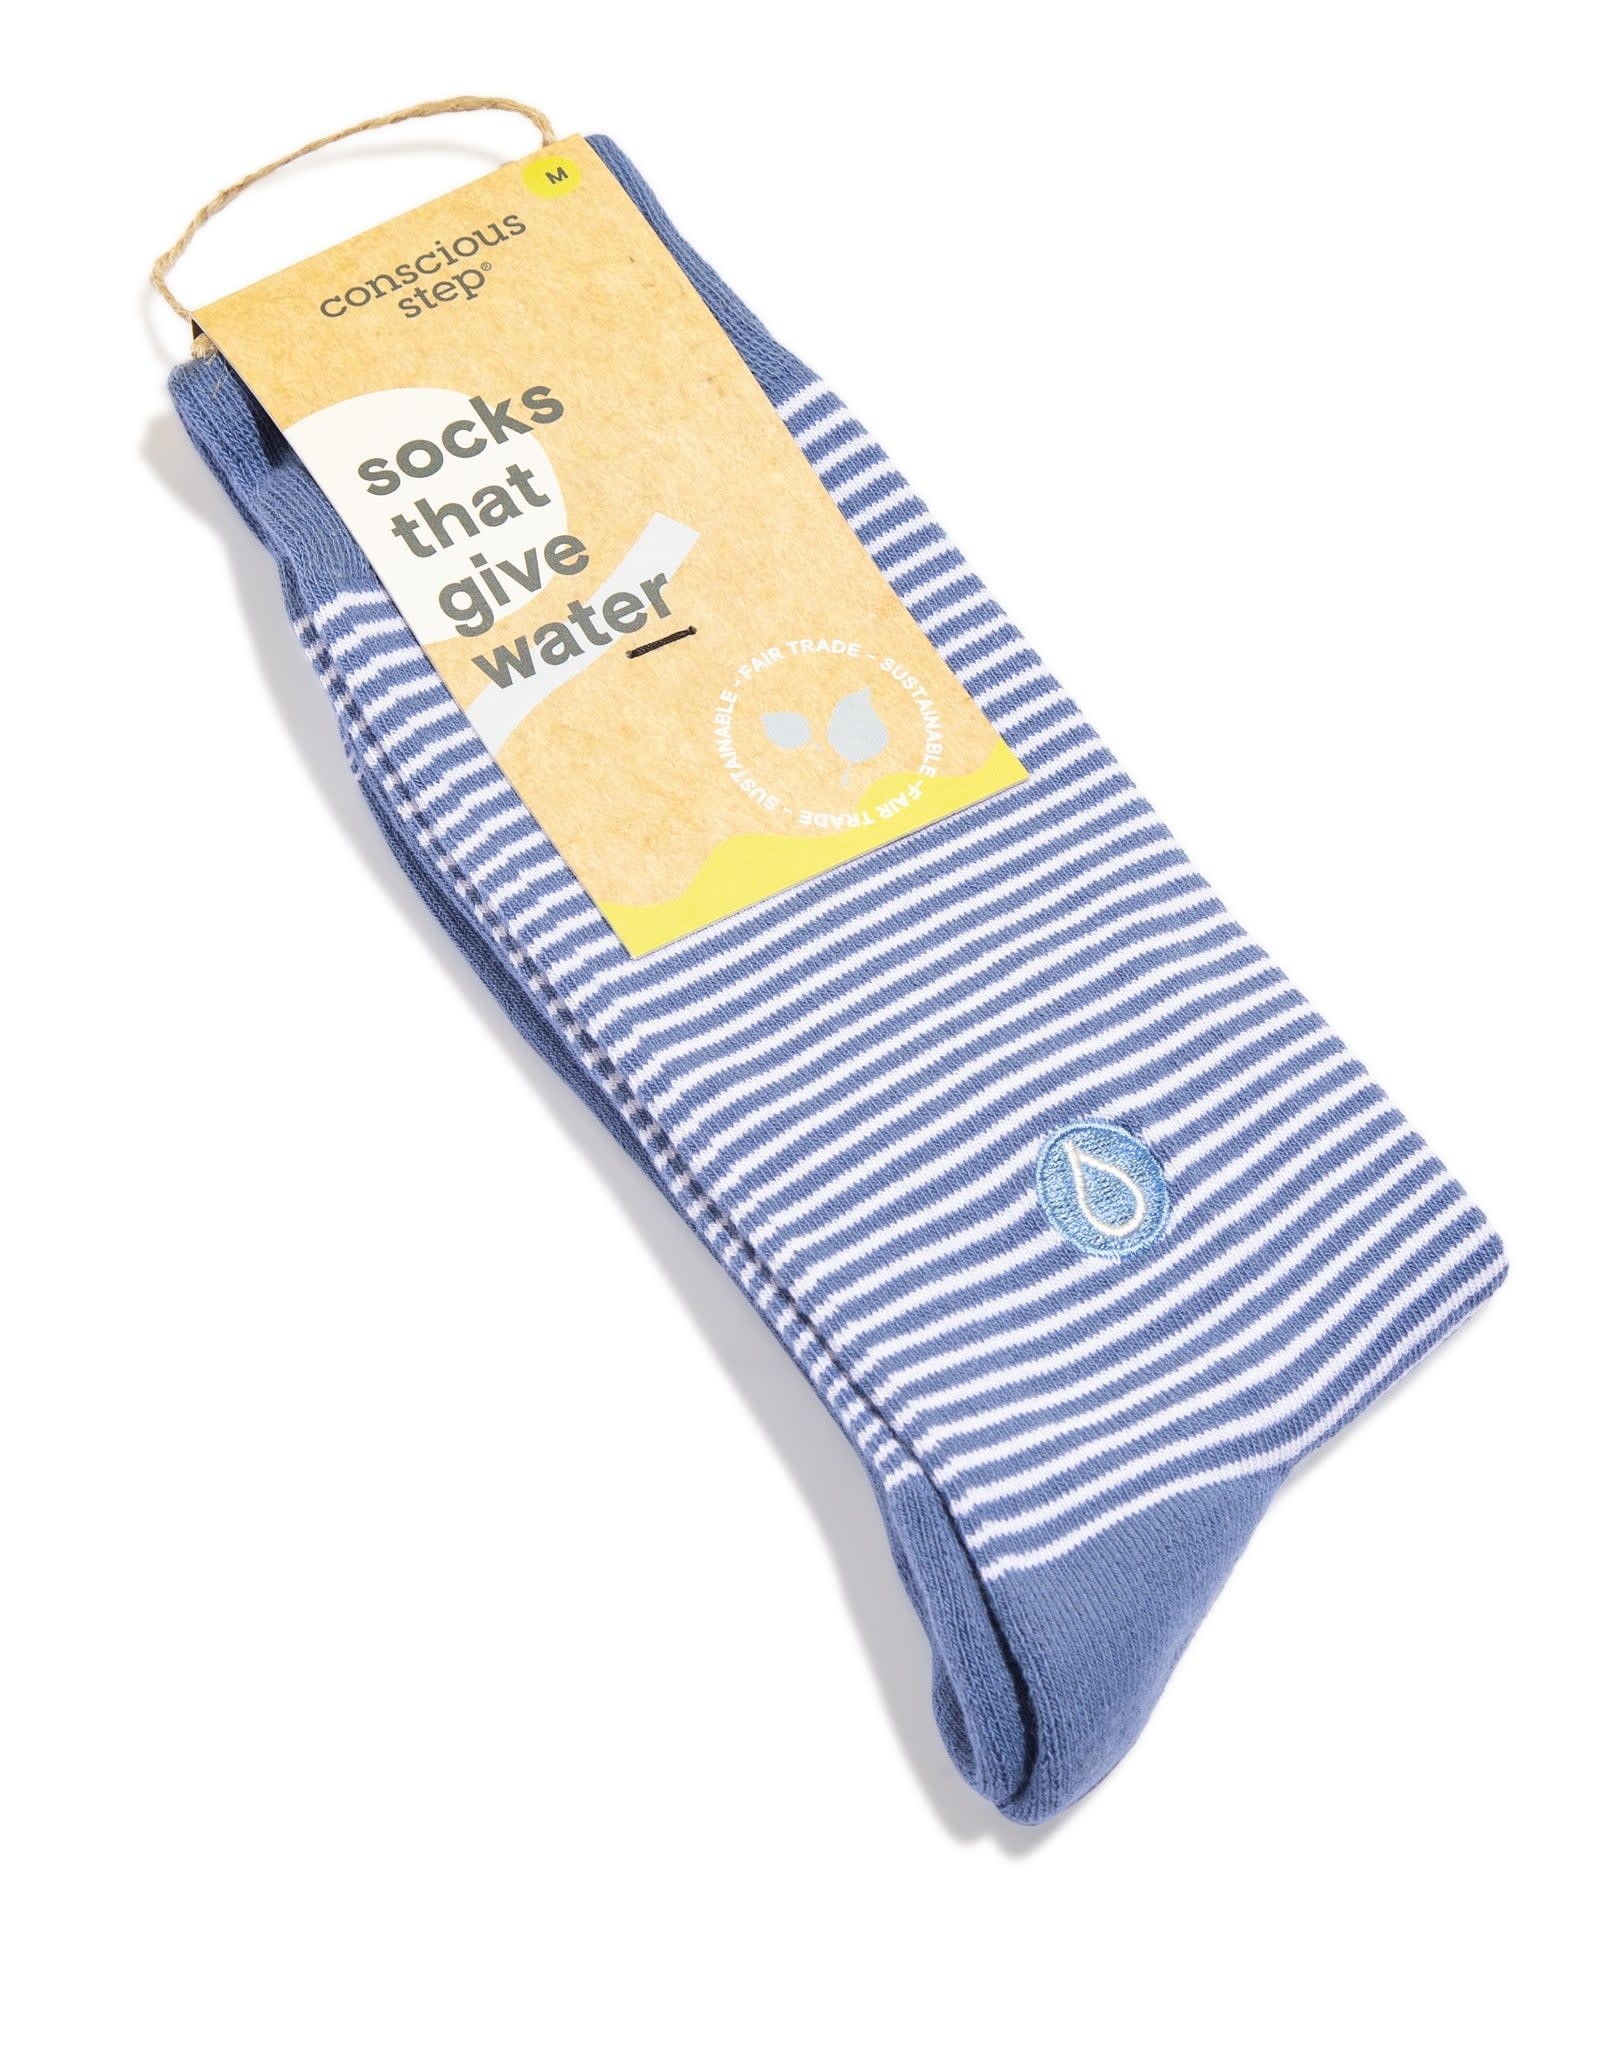 Conscious Step Socks that Give Water - Blue Stripes Medium